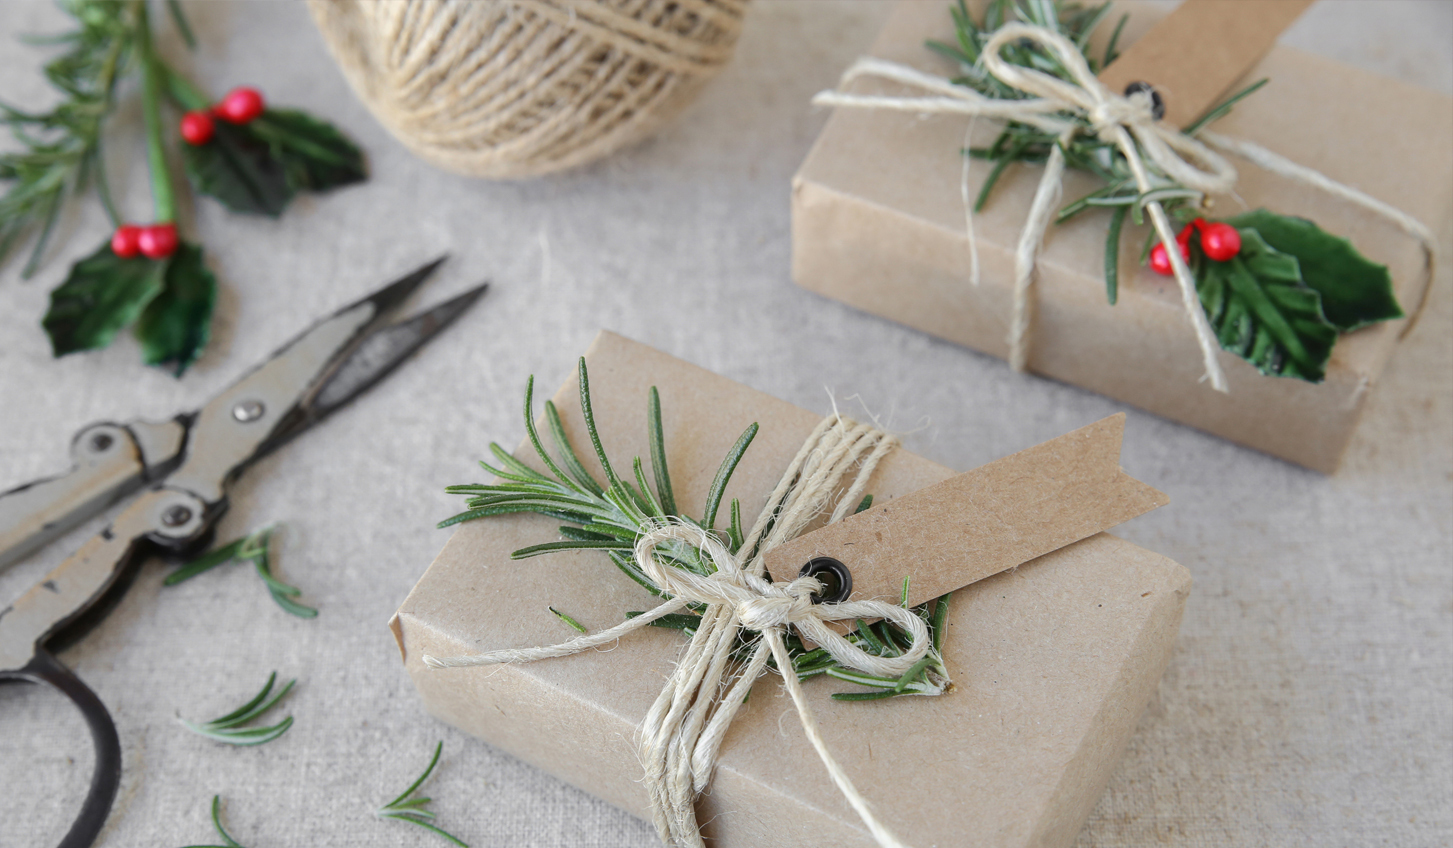 Put the wow in eco-friendly wrapping